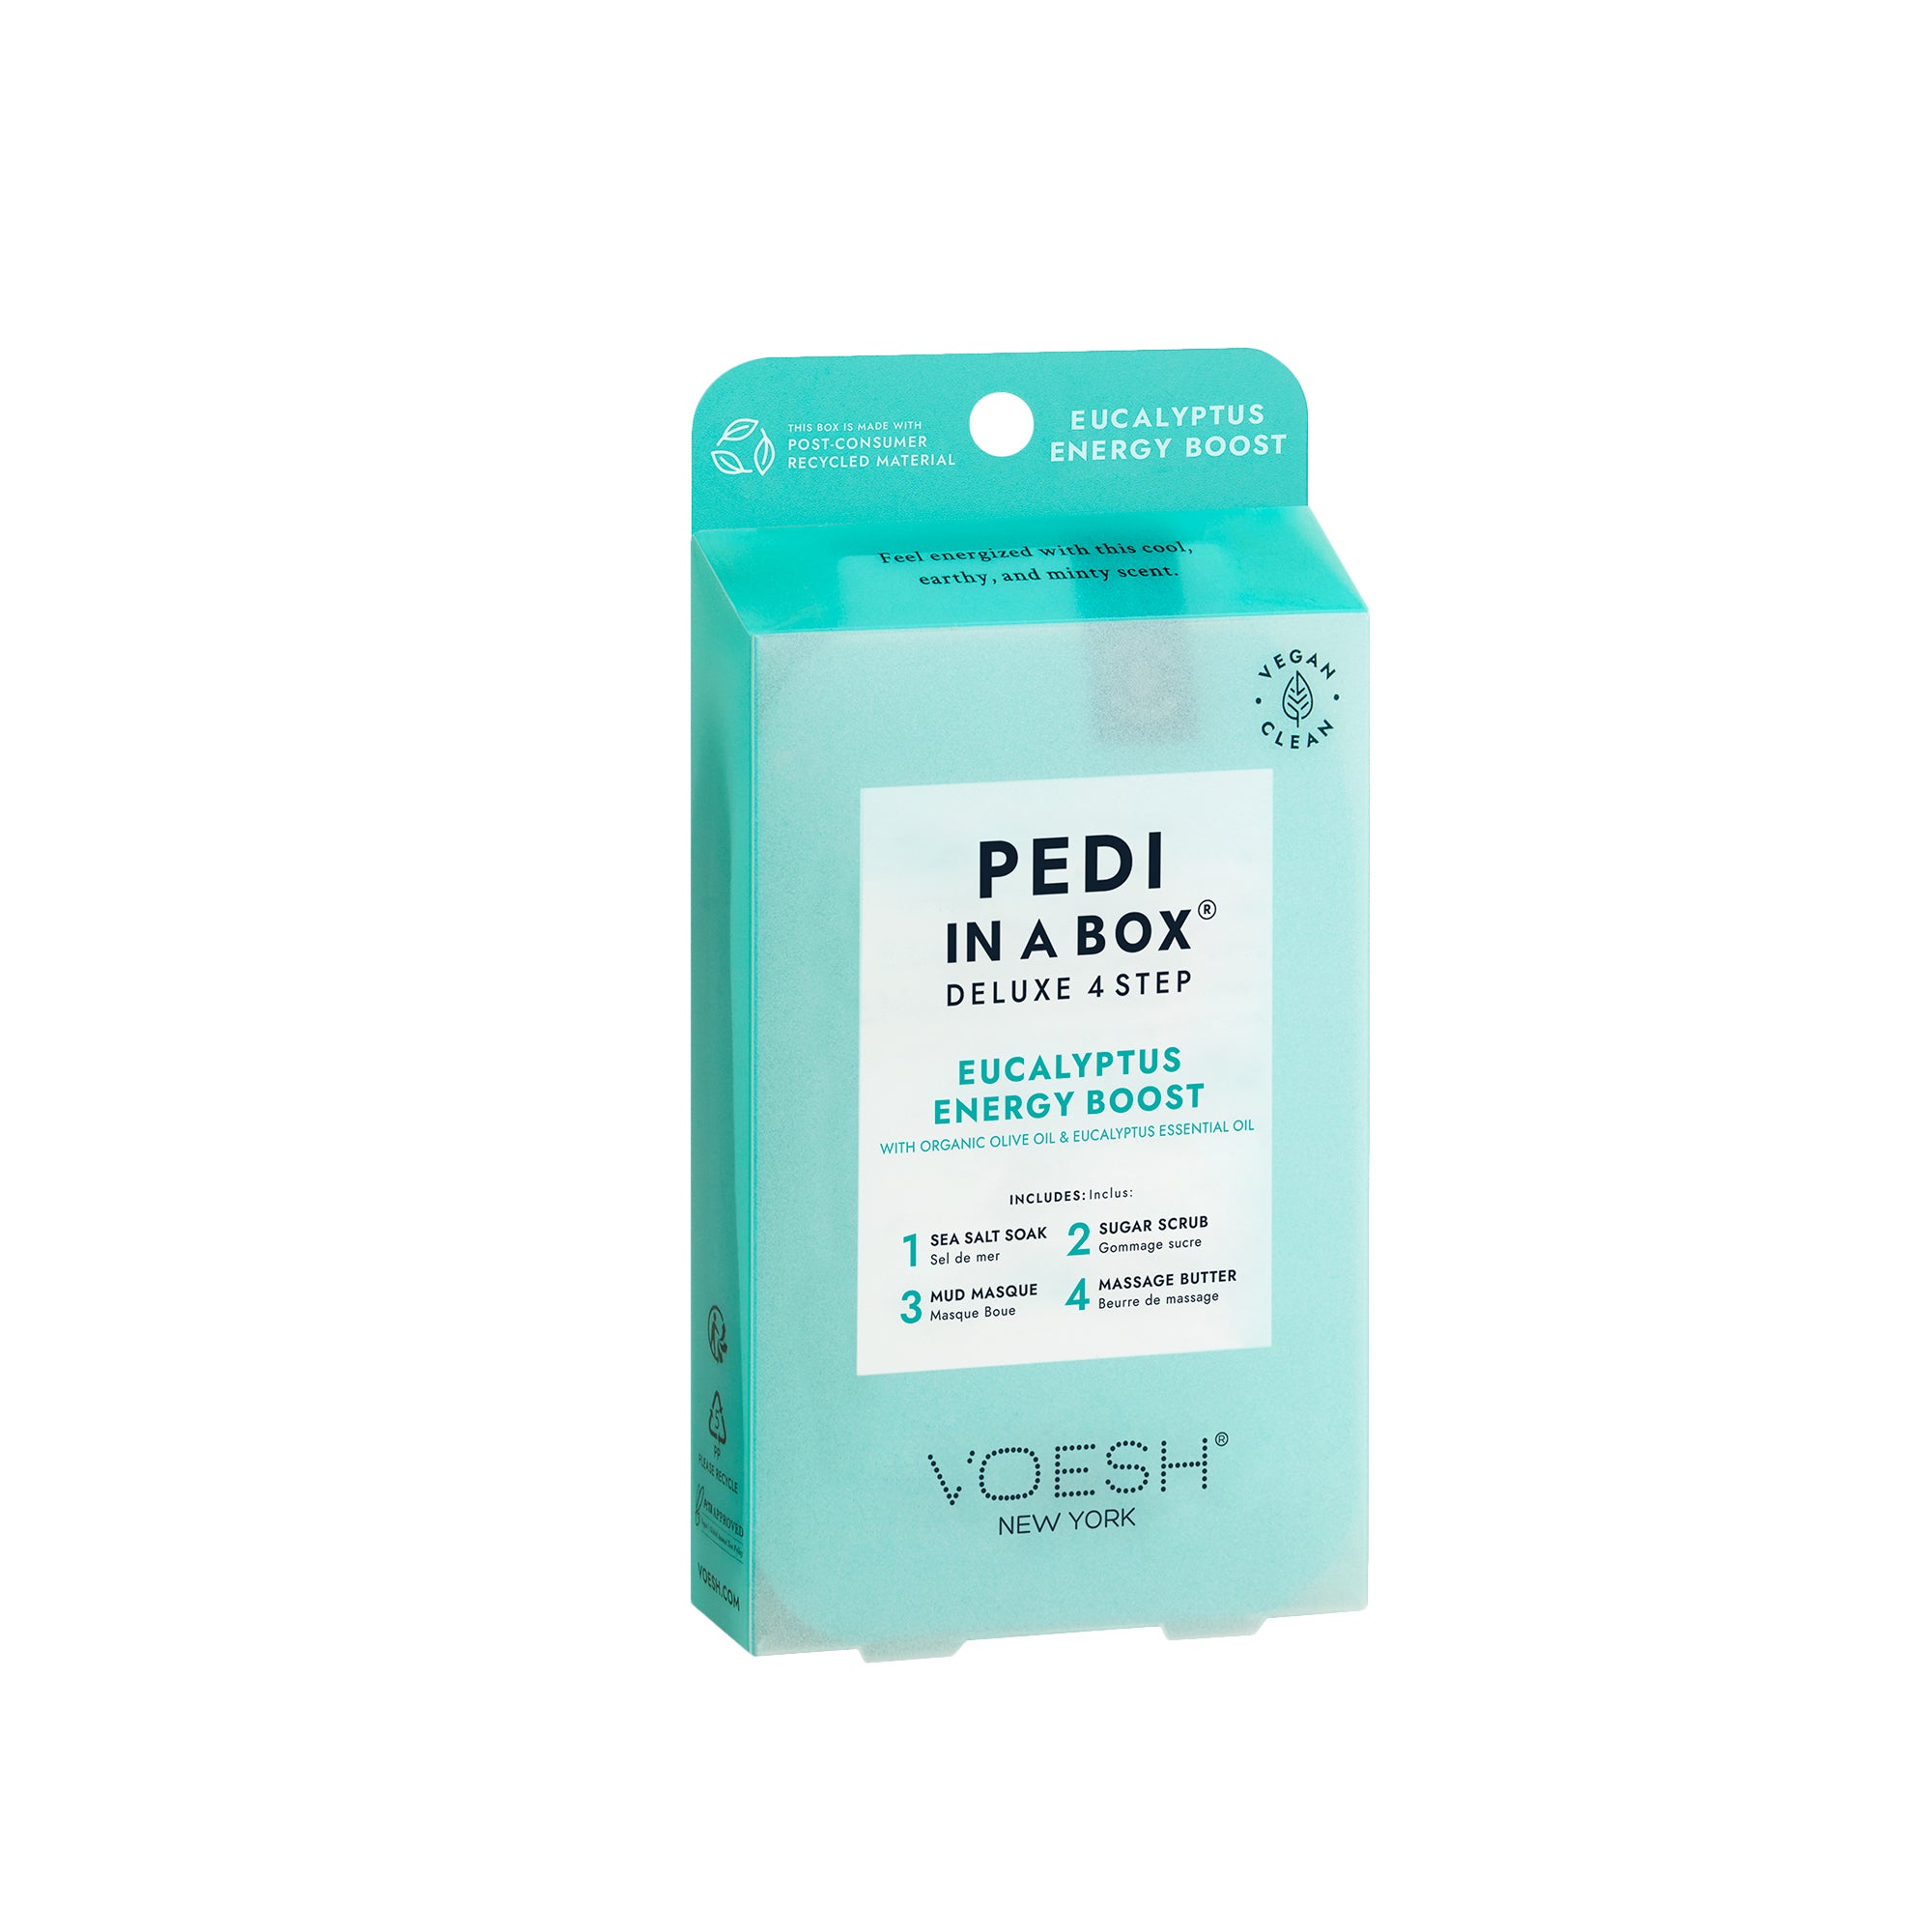 Voesh Deluxe 4 Step Pedi-in-a-Box Eucalyptus Energy Boost